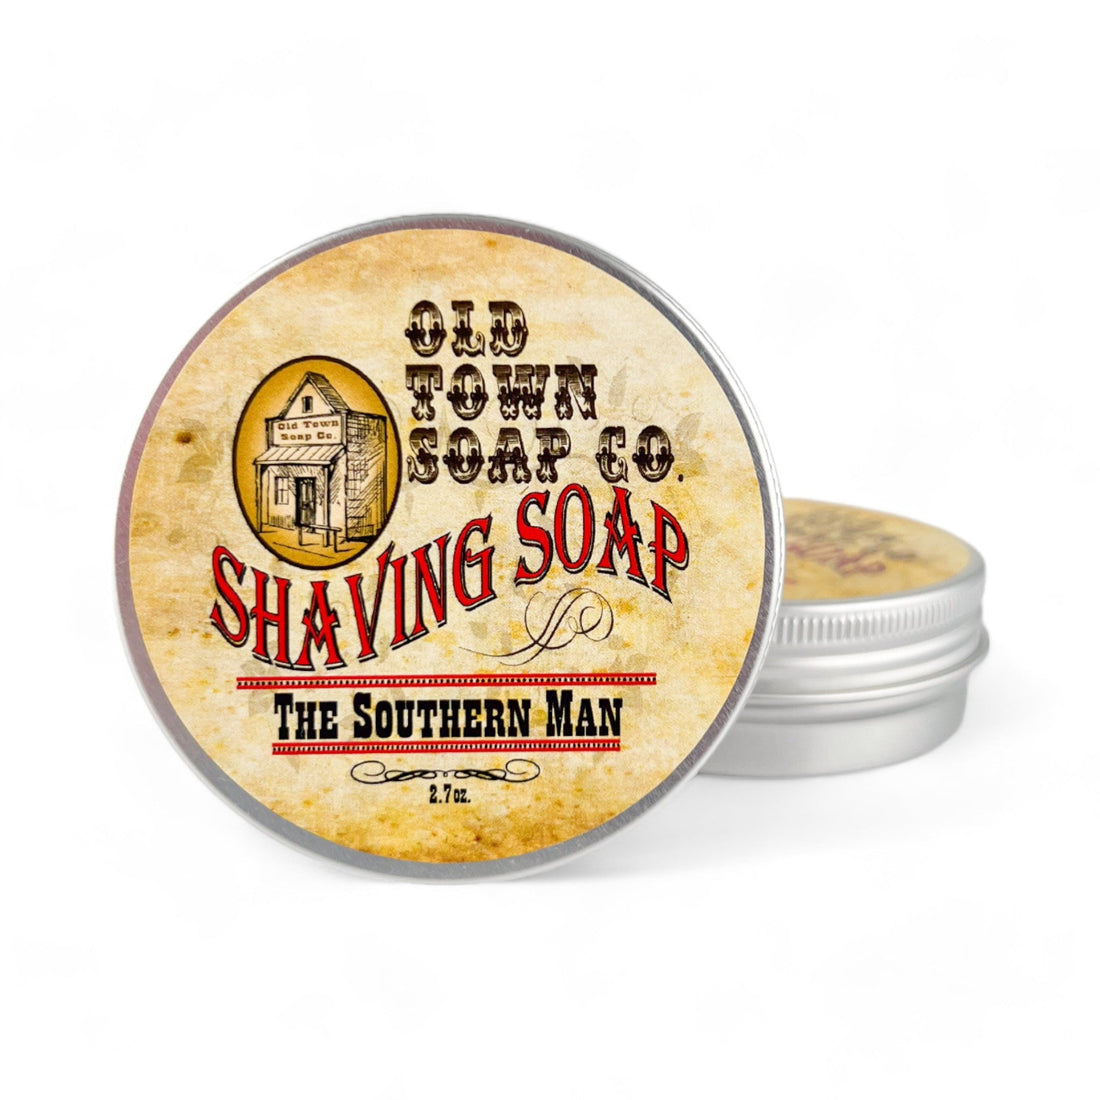 The Southern Man -Shave Soap Tin - Old Town Soap Co.